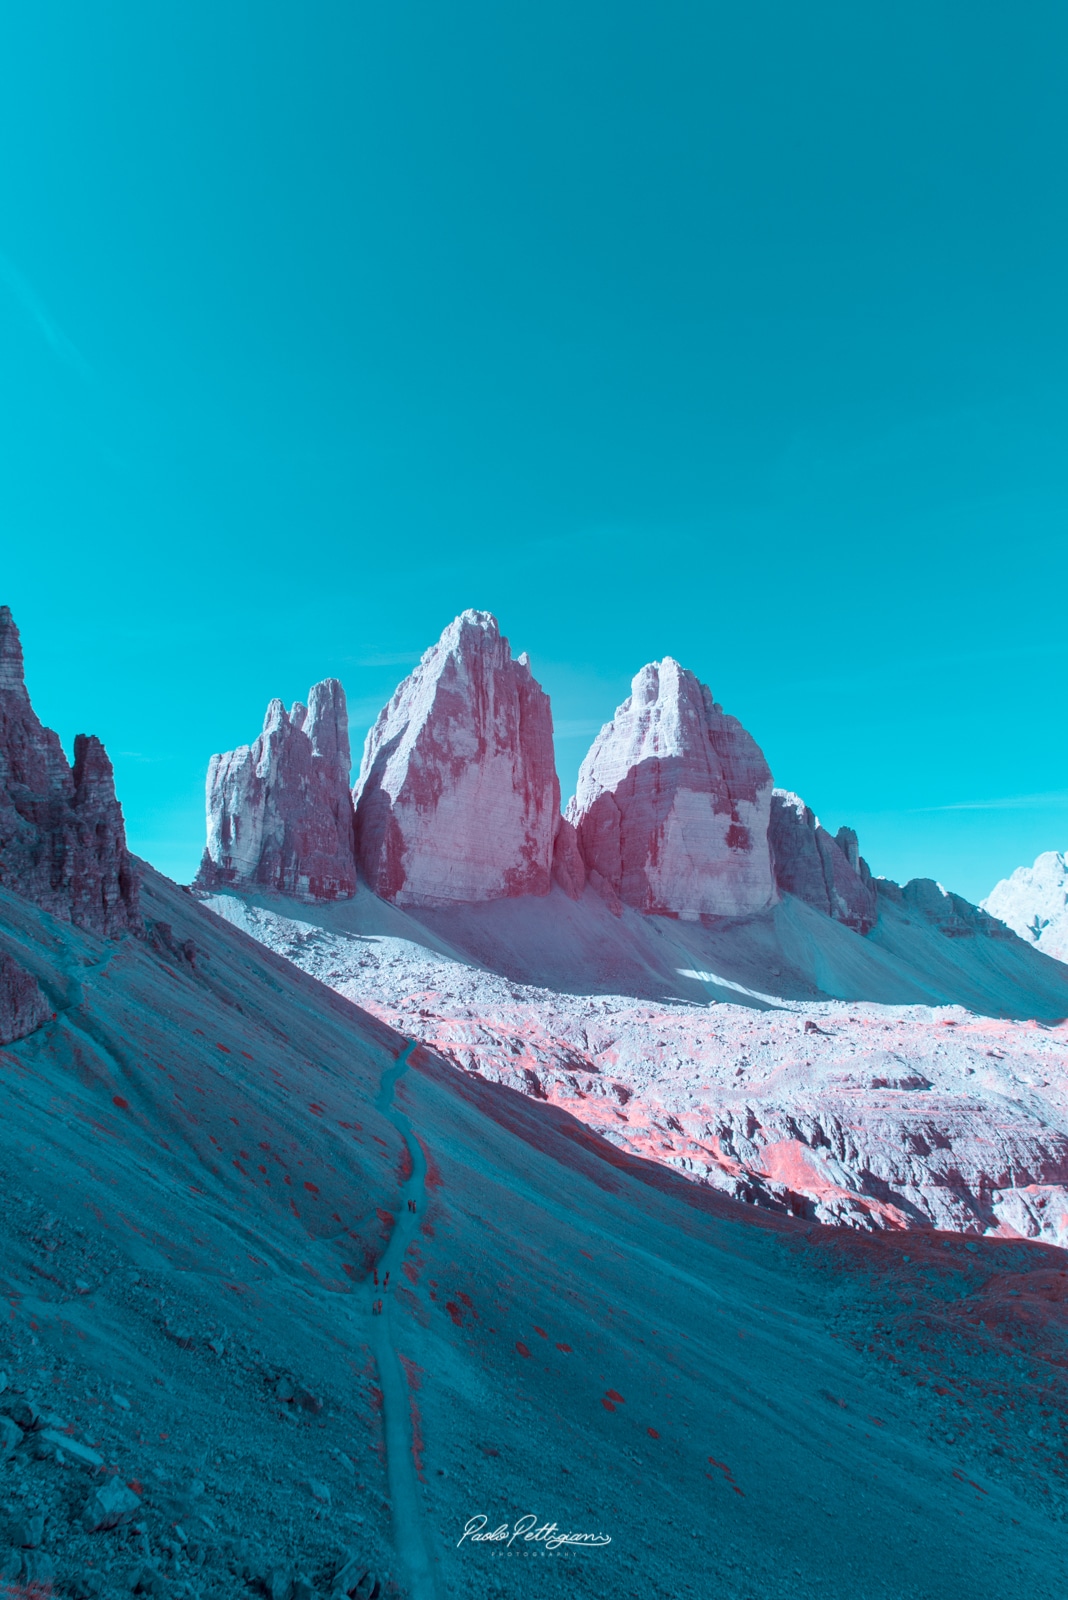 Infrared Photos of the Dolomites by Paolo Pettigiani